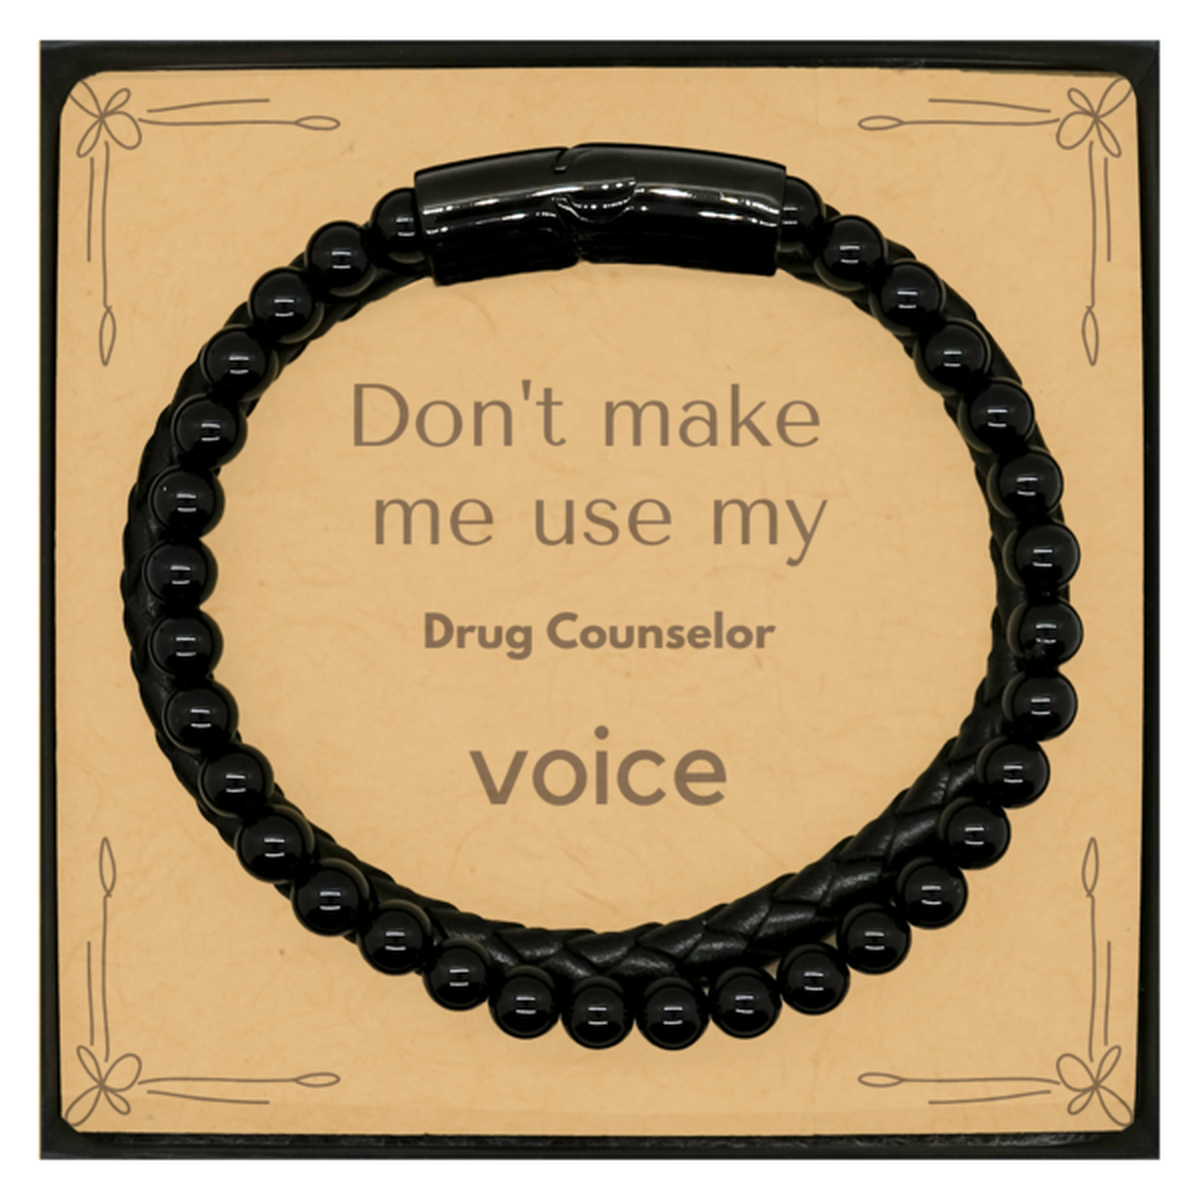 Don't make me use my Drug Counselor voice, Sarcasm Drug Counselor Card Gifts, Christmas Drug Counselor Stone Leather Bracelets Birthday Unique Gifts For Drug Counselor Coworkers, Men, Women, Colleague, Friends